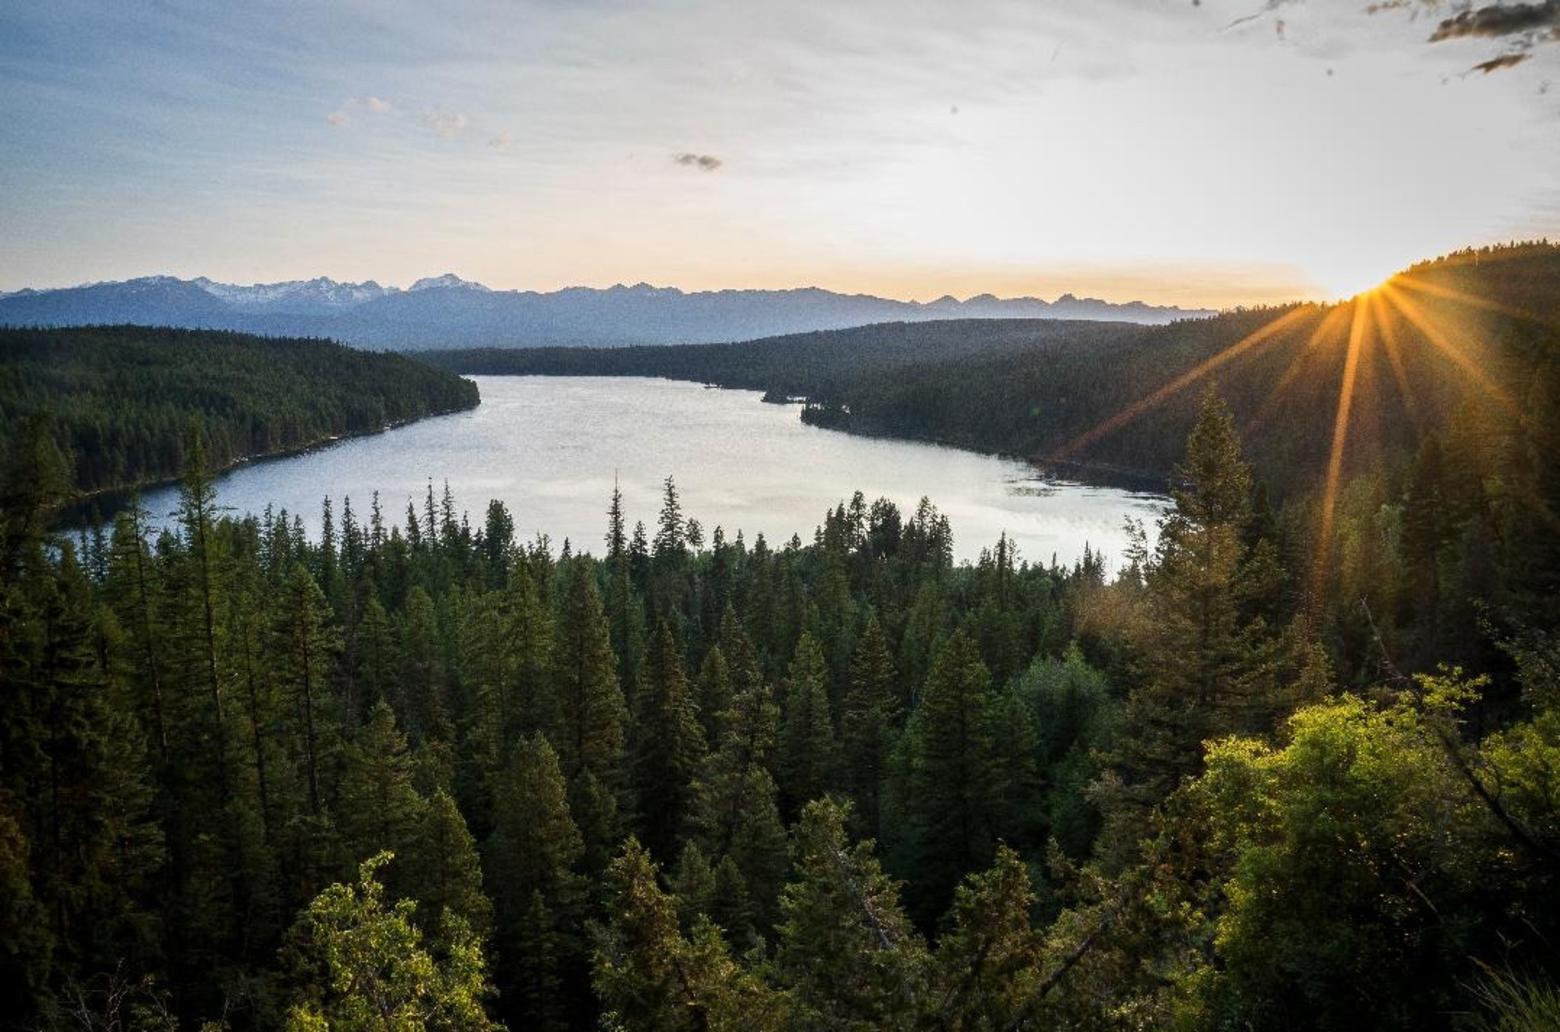 Holland Lake and environs, located west of the Bob Marshall Wilderness, represents an important wild extension of the Northern Continental Divide Ecosystem. Photo courtesy Charlie McLaughlin